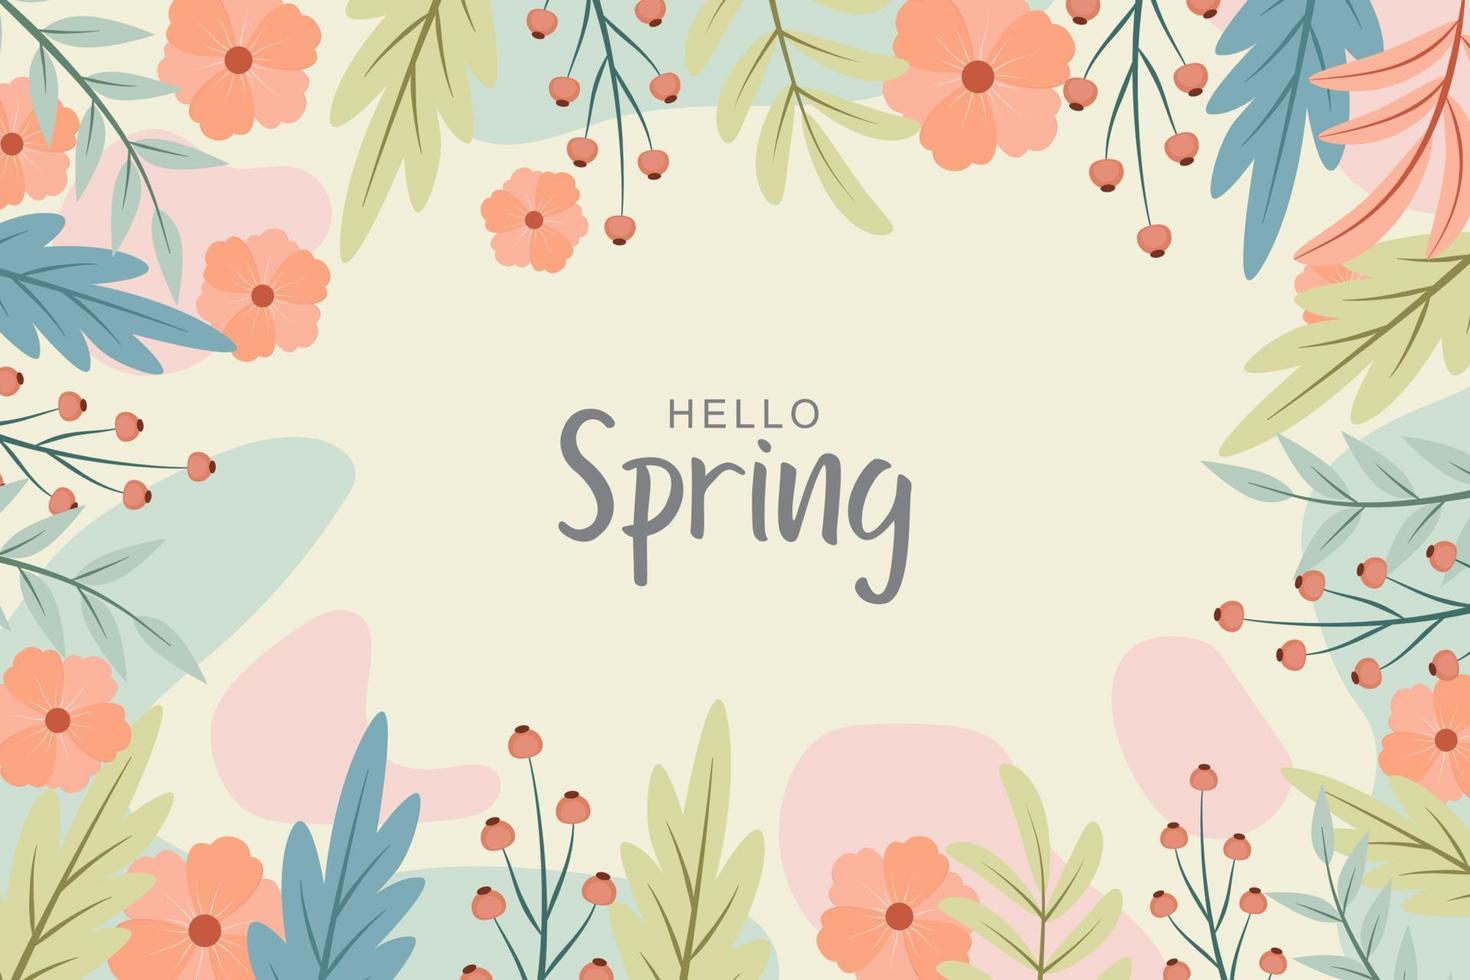 Beautiful spring background with hand drawn flowers vector